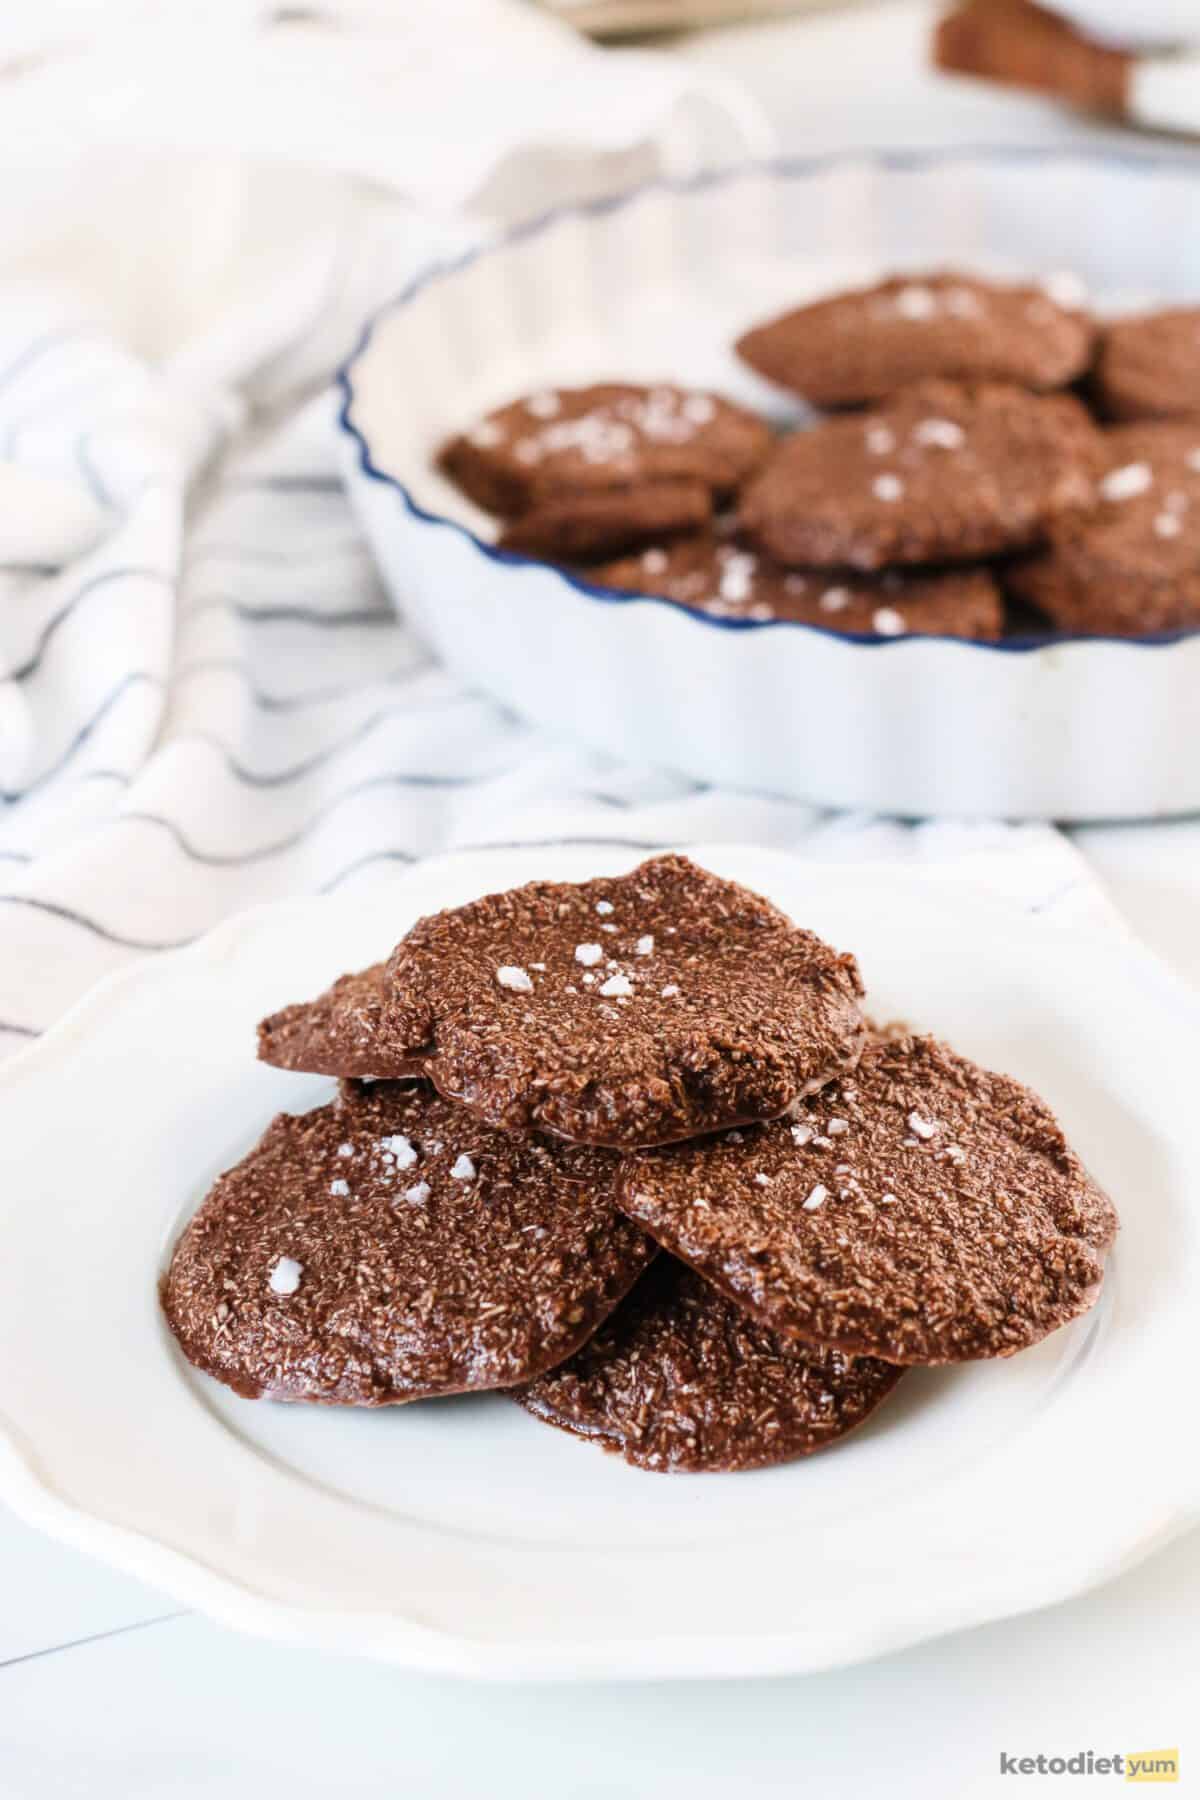 Keto almond butter cookies served on a white plate